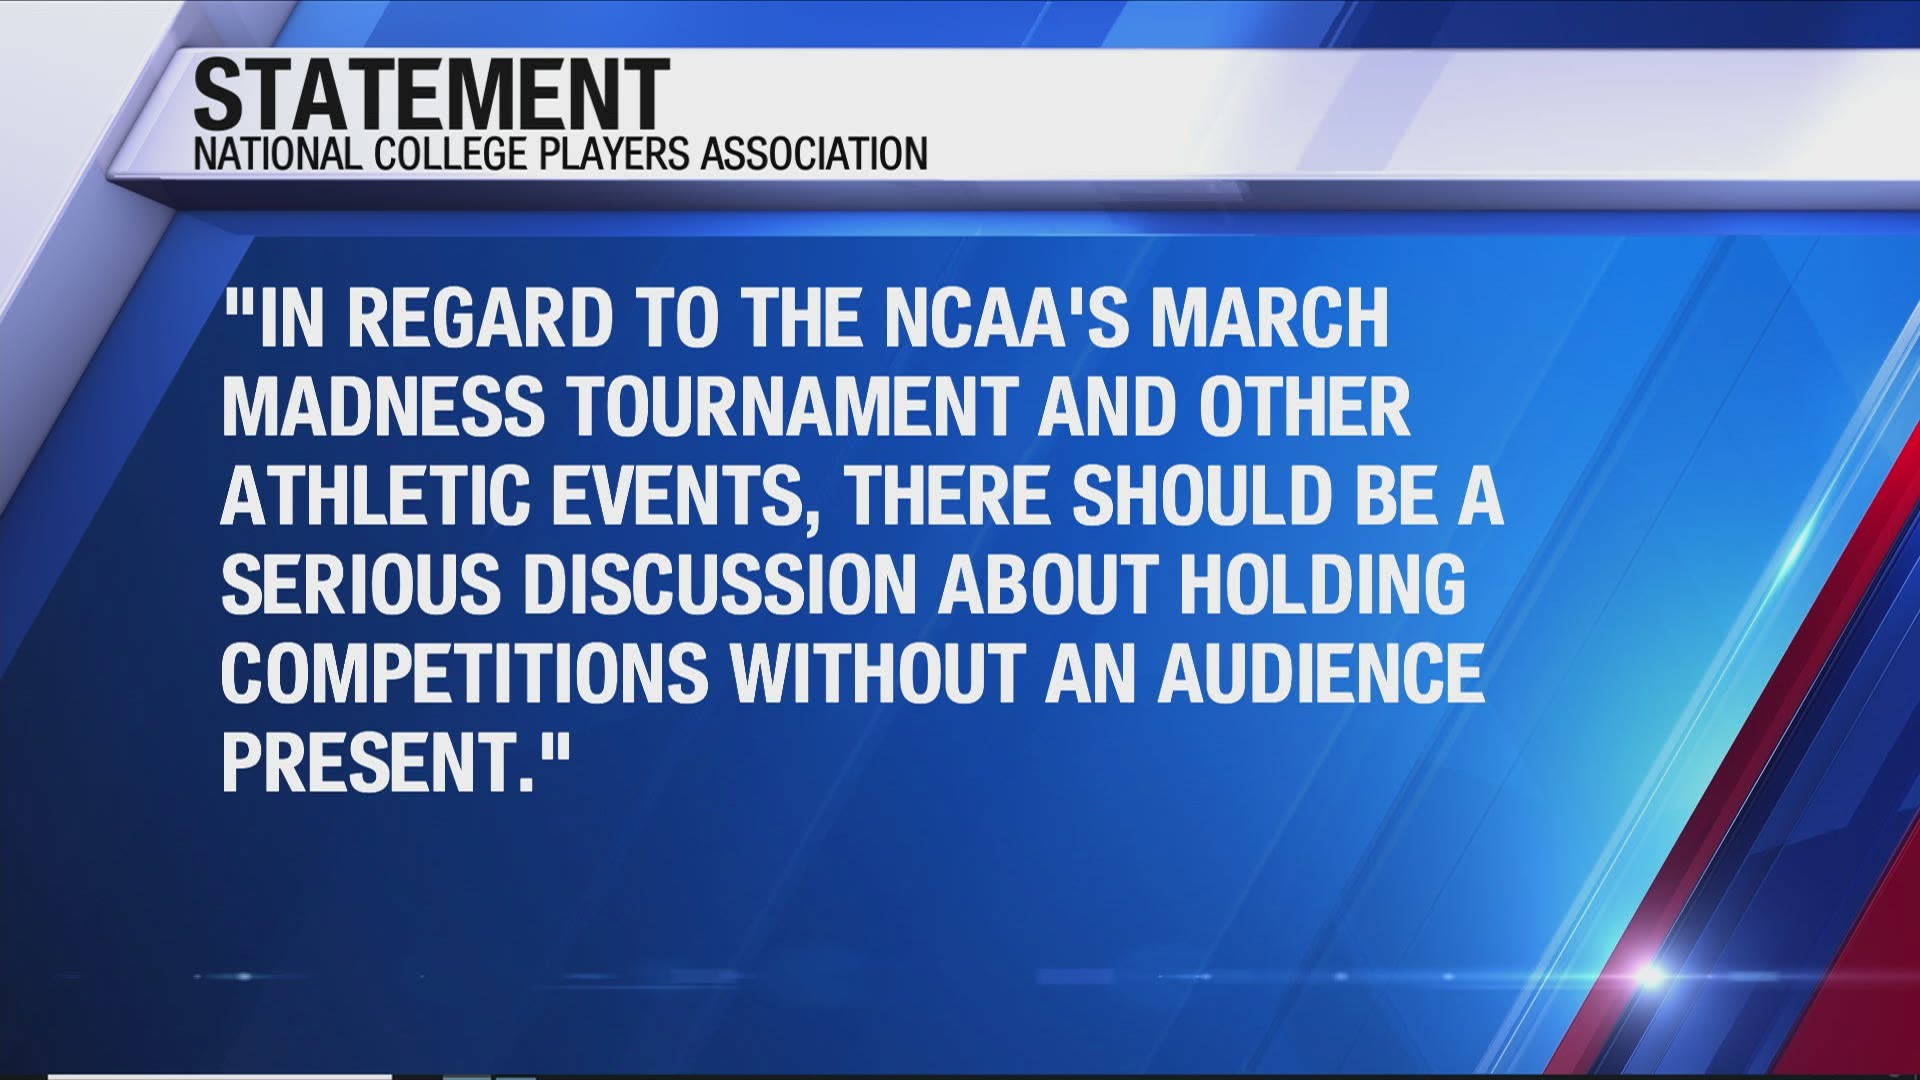 One group is suggesting that games for March Madness and other sporting events be played without an audience to protect athletes from the Coronavirus.